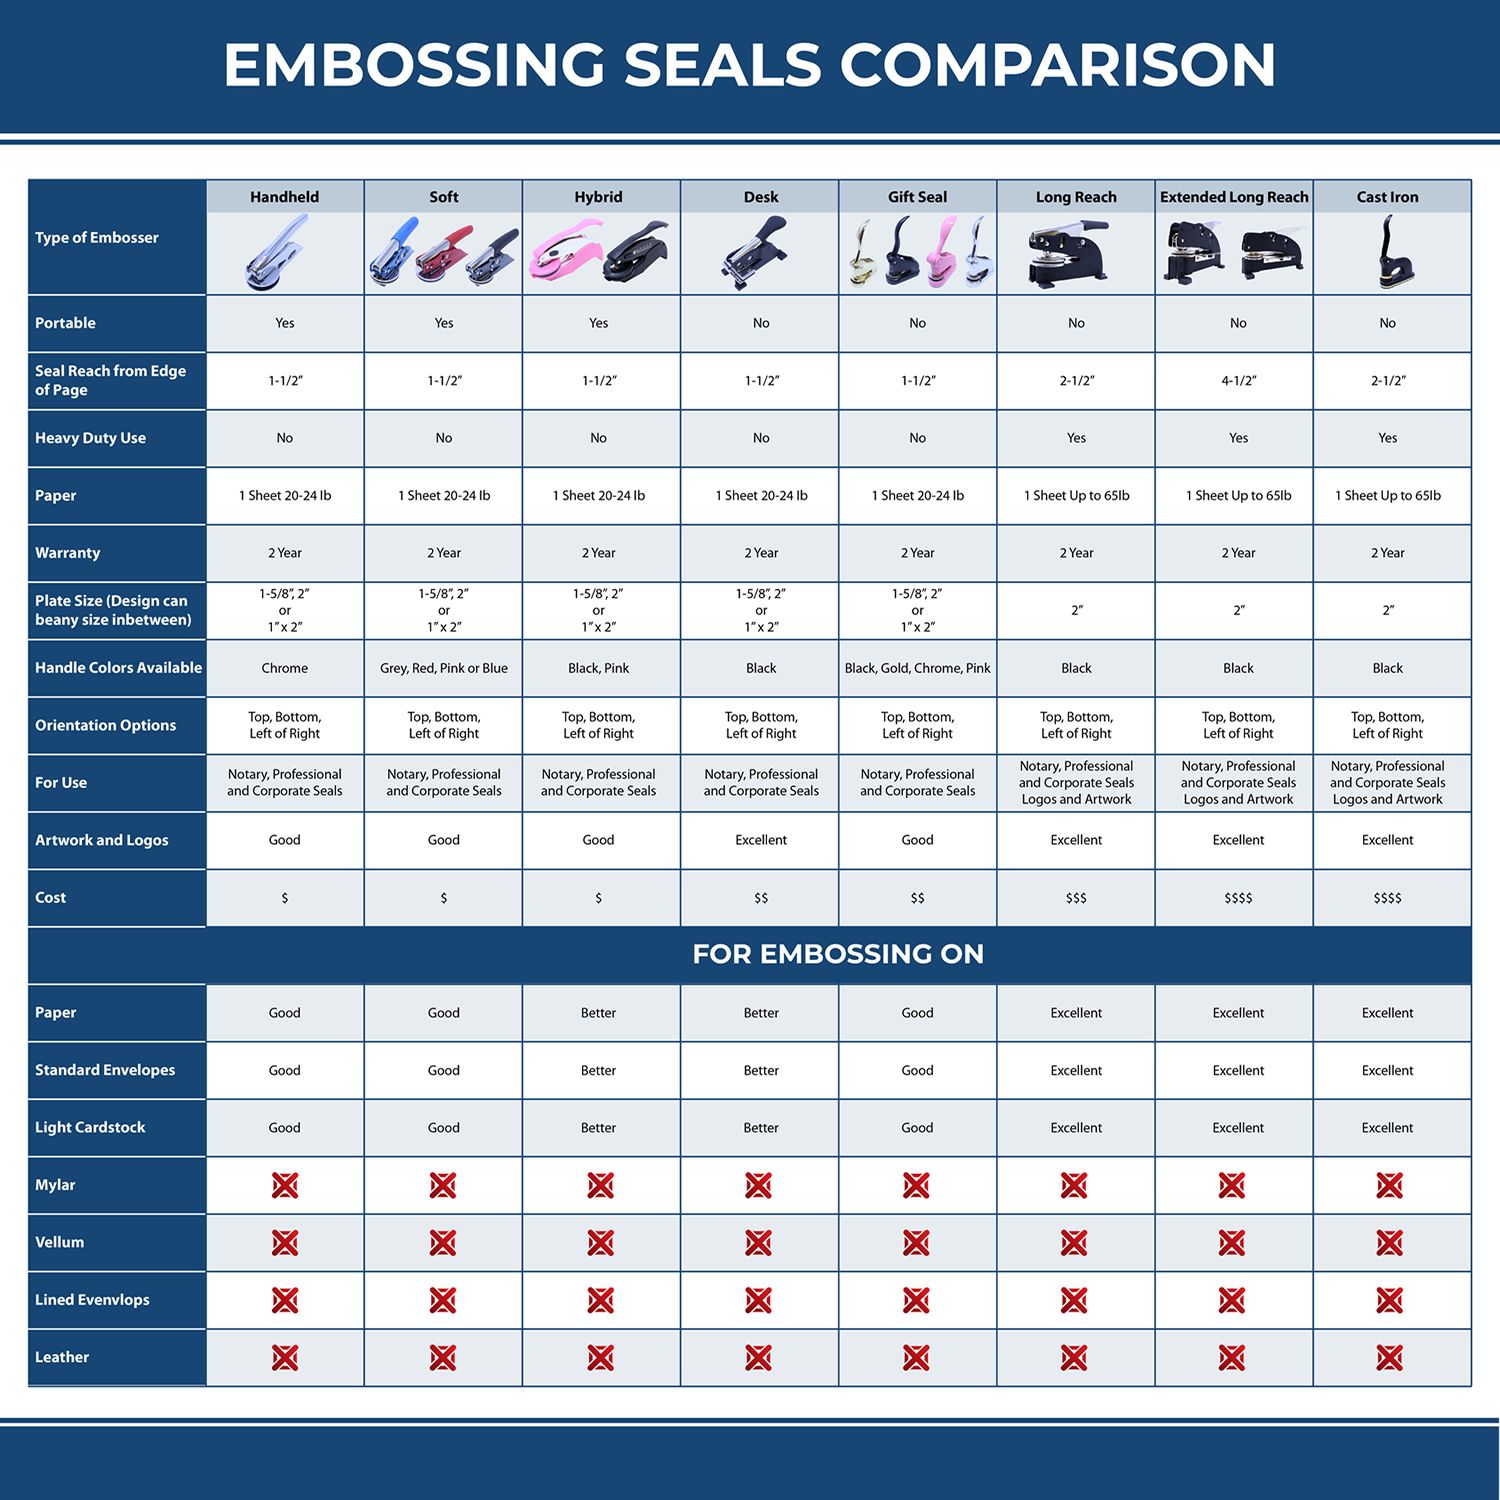 A comparison chart for the different types of mount models available for the Tennessee Long Reach Landscape Architect Embossing Stamp.